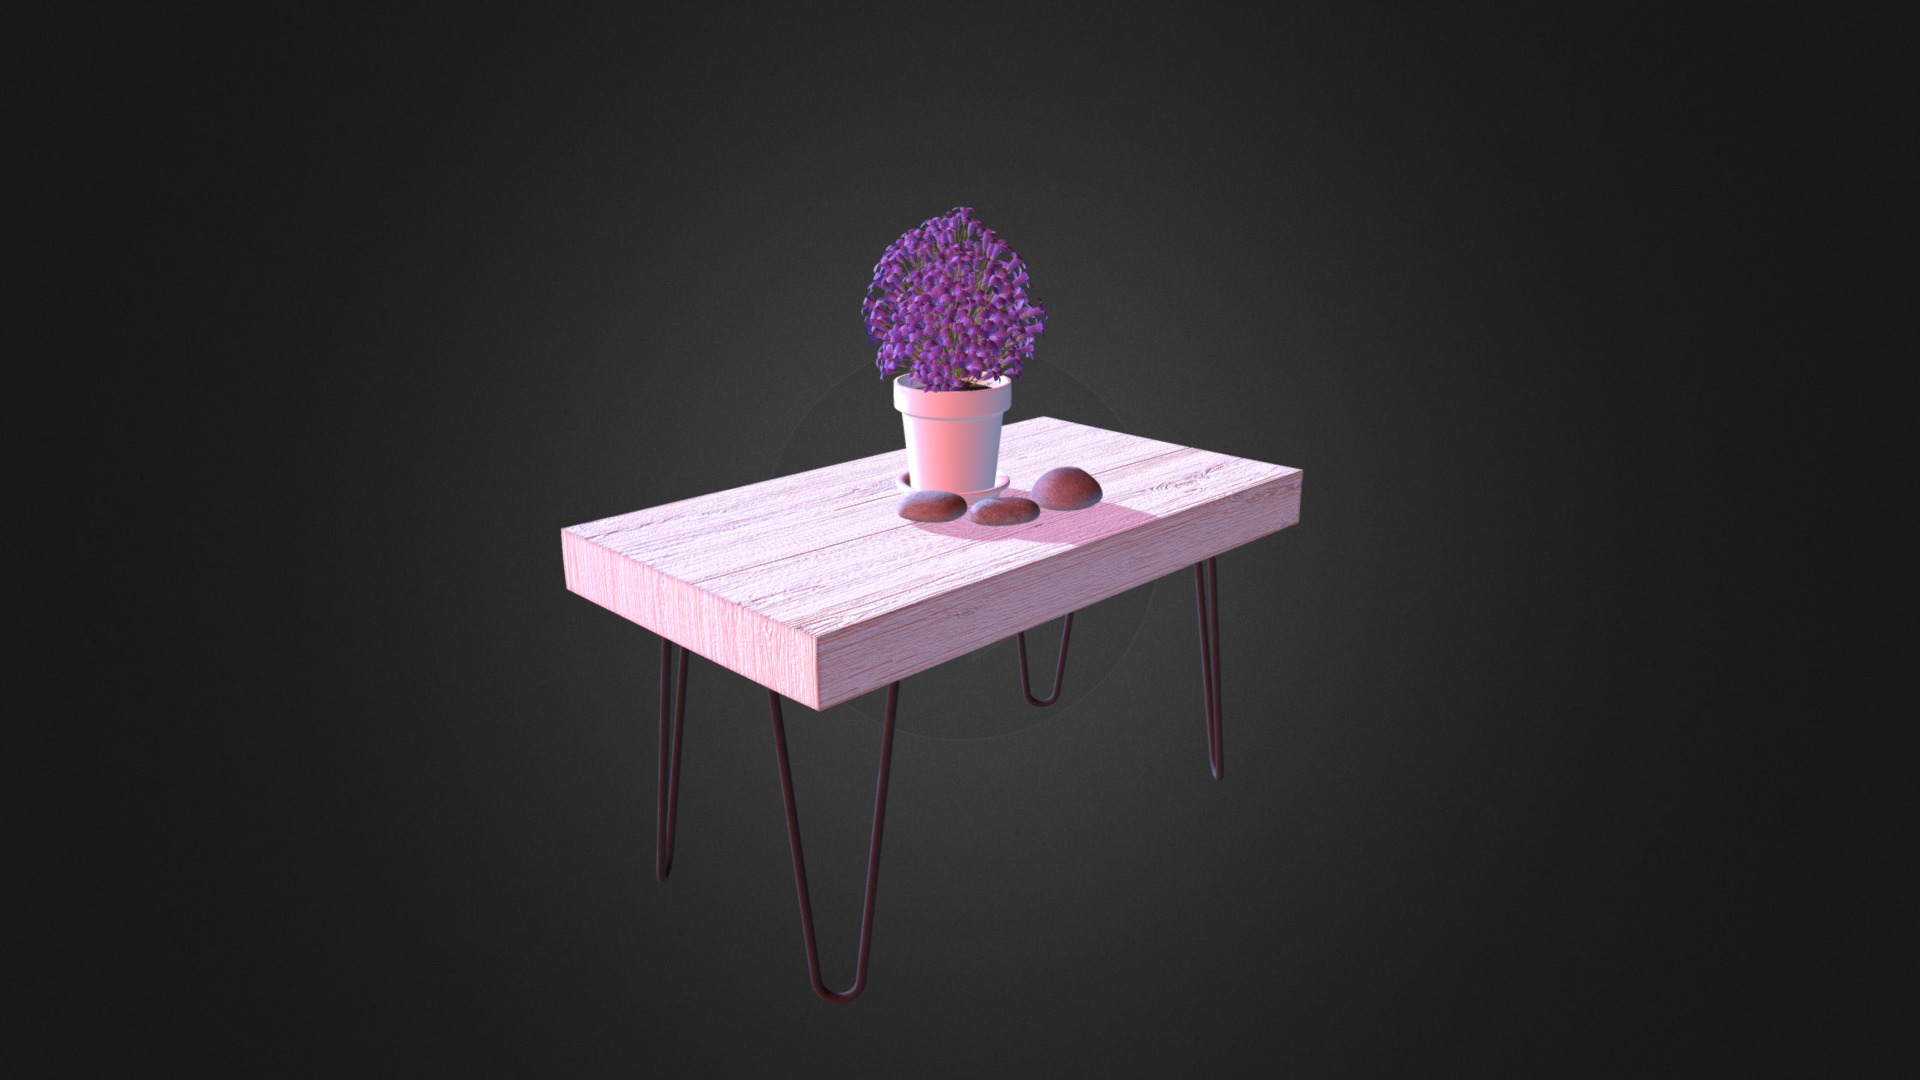 3D model Worn Wood Coffee Table D Model - This is a 3D model of the Worn Wood Coffee Table D Model. The 3D model is about a small table with a purple flower on top.